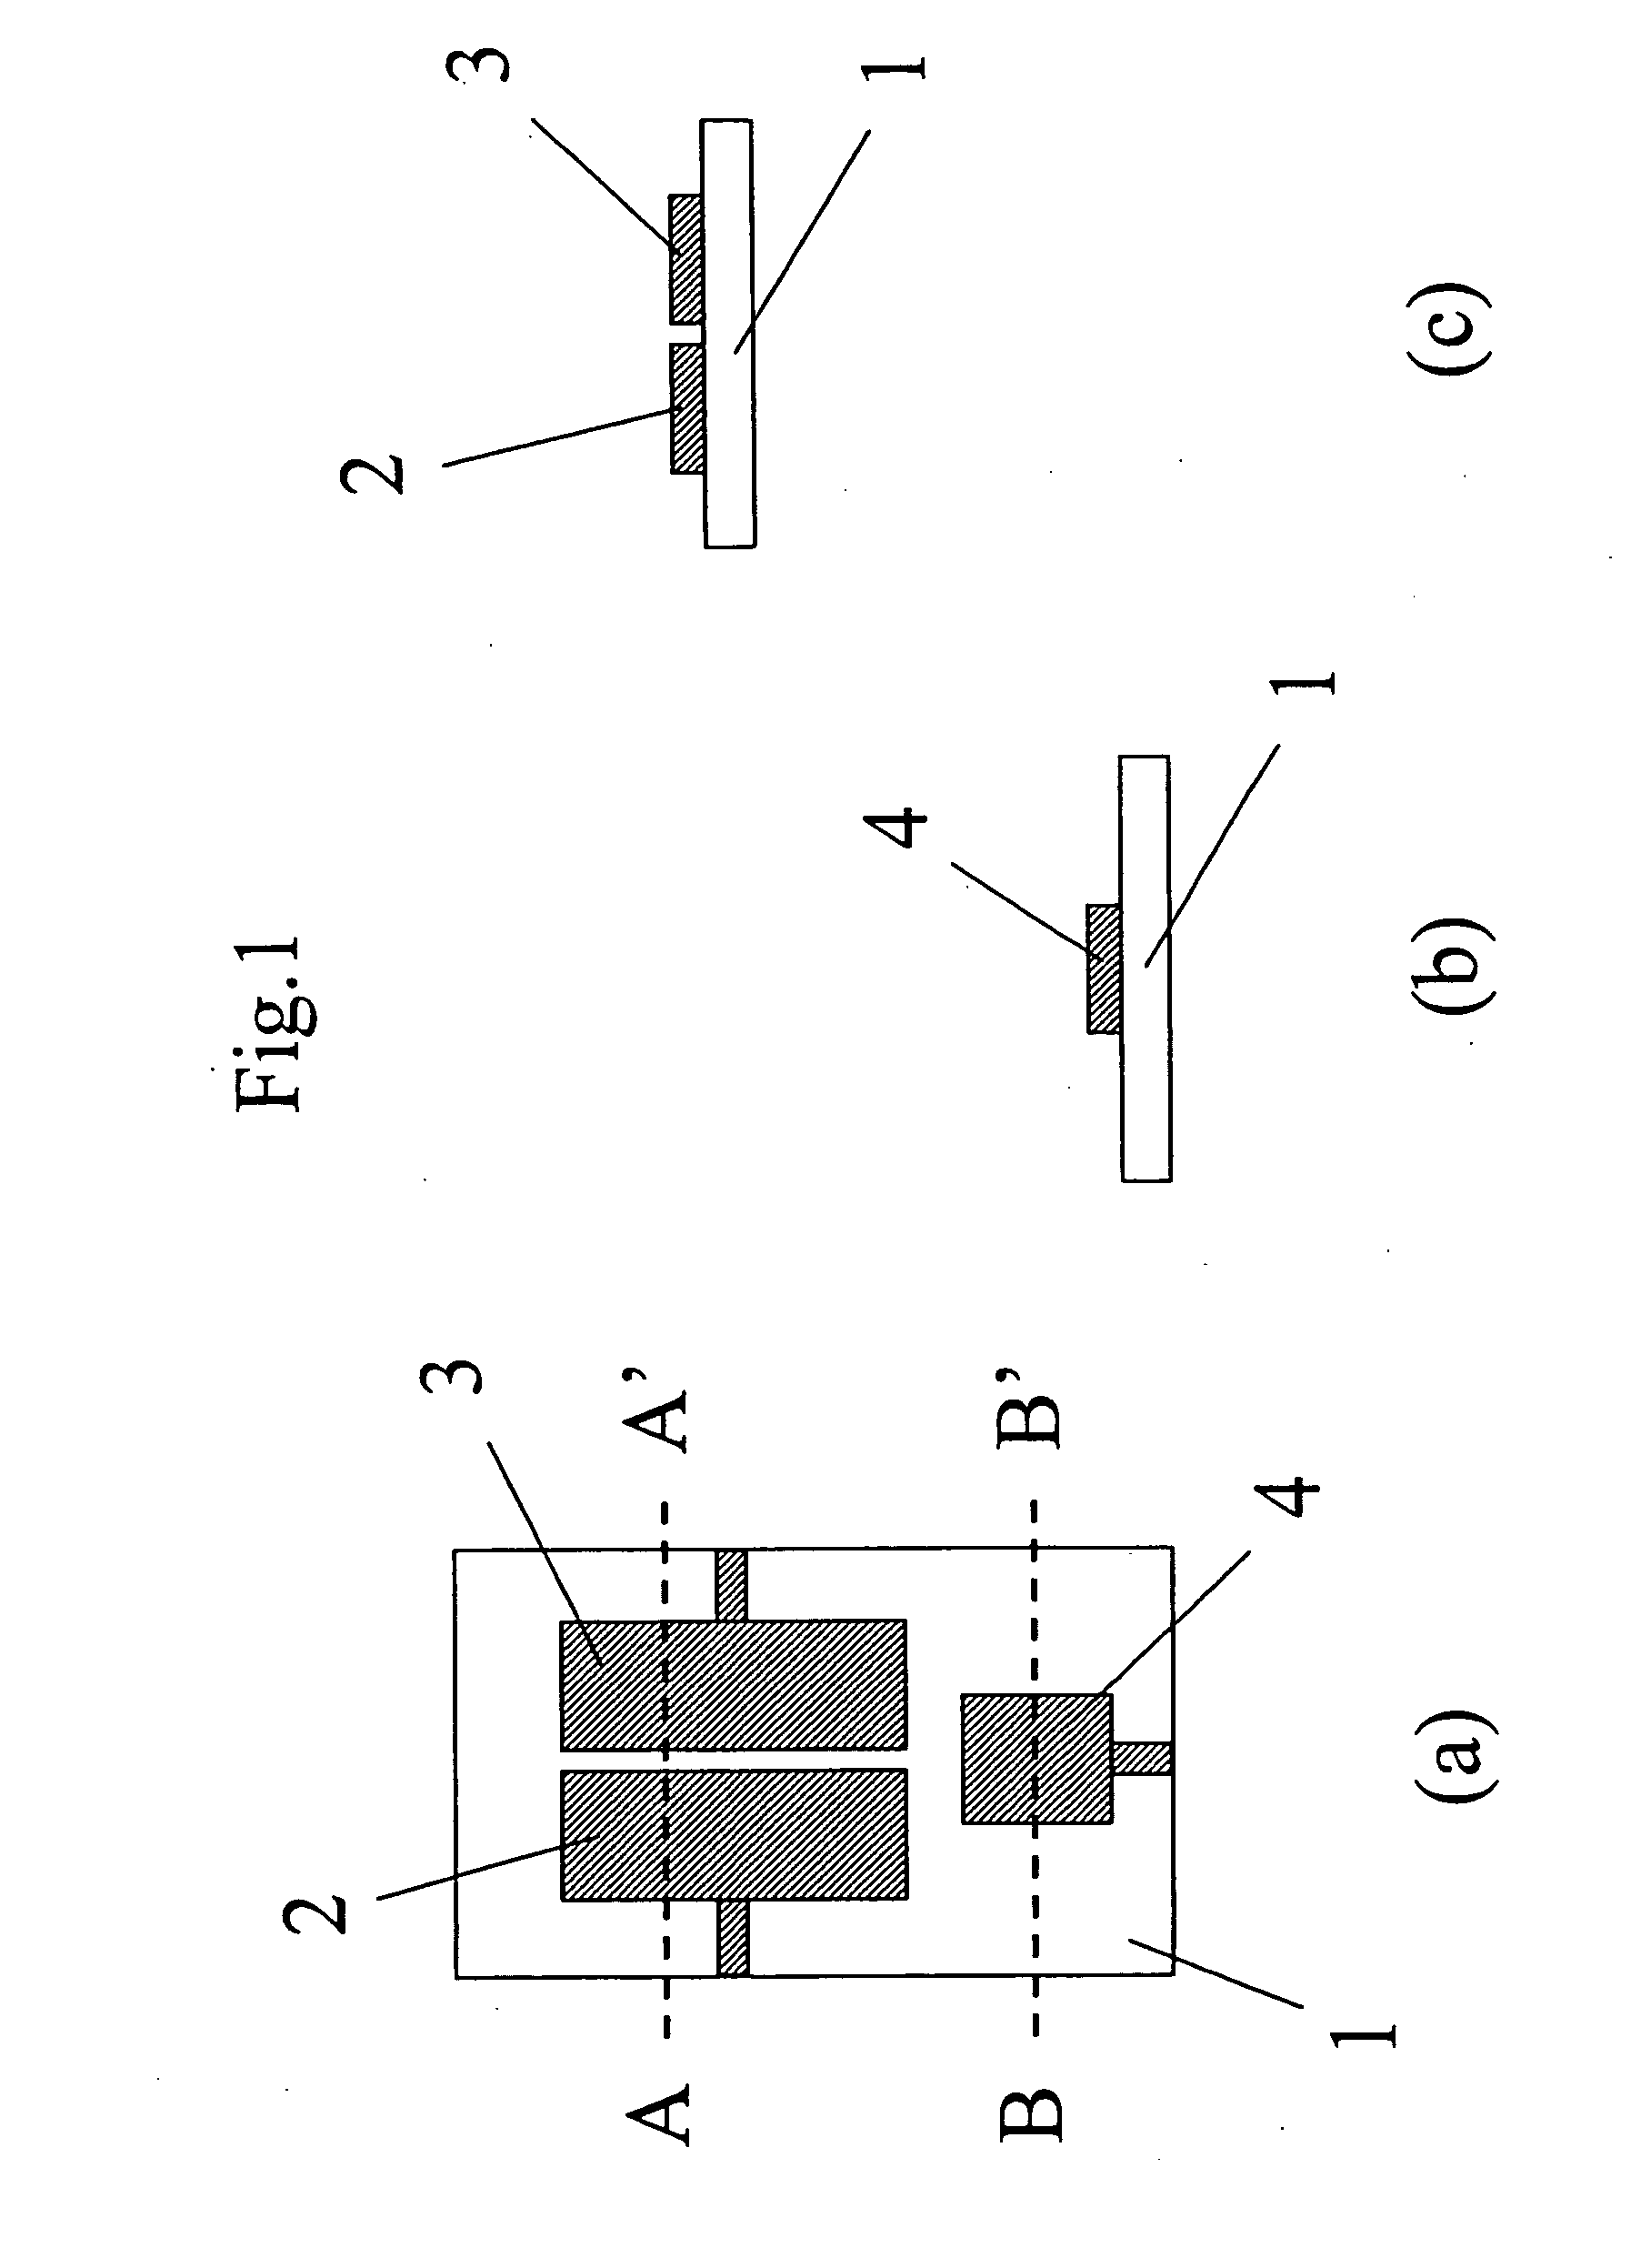 Electrolyte pattern and method for manufacturing an electrolyte pattern